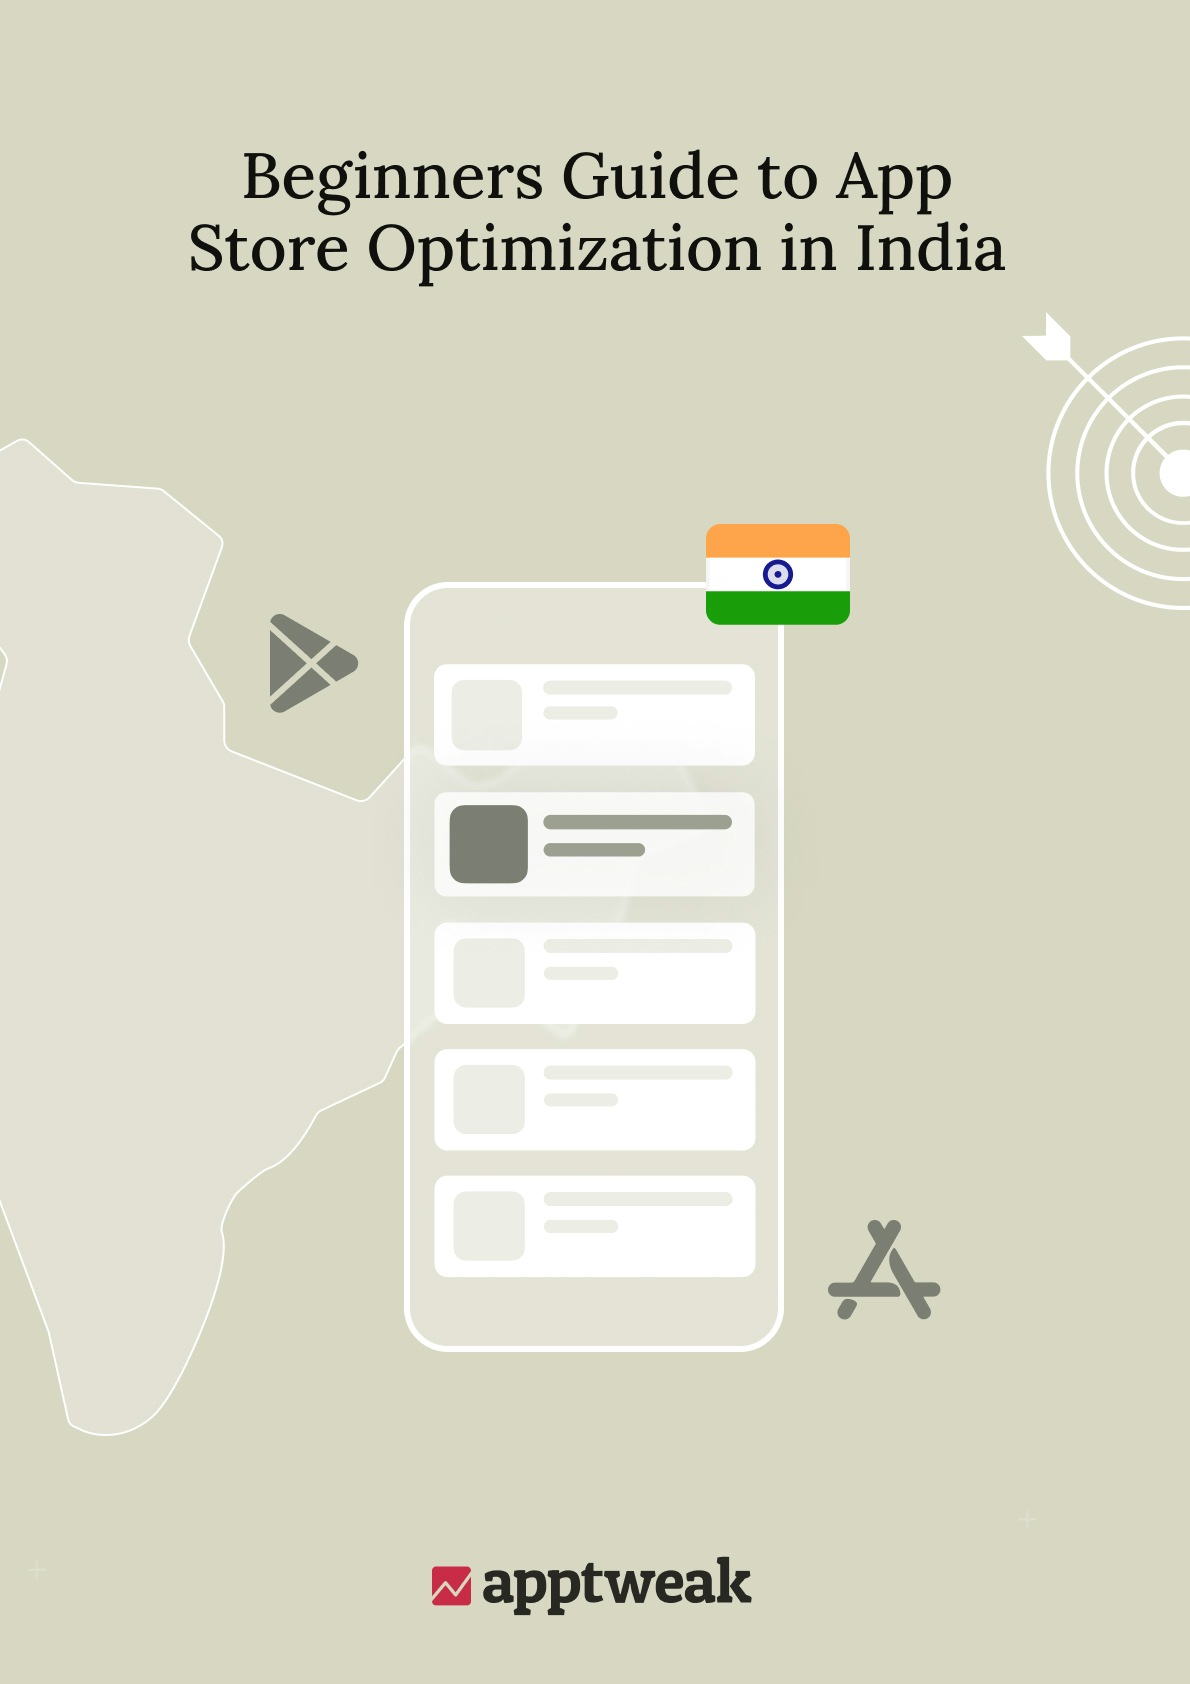 Image - App Store Optimization in India Guide - guide cover